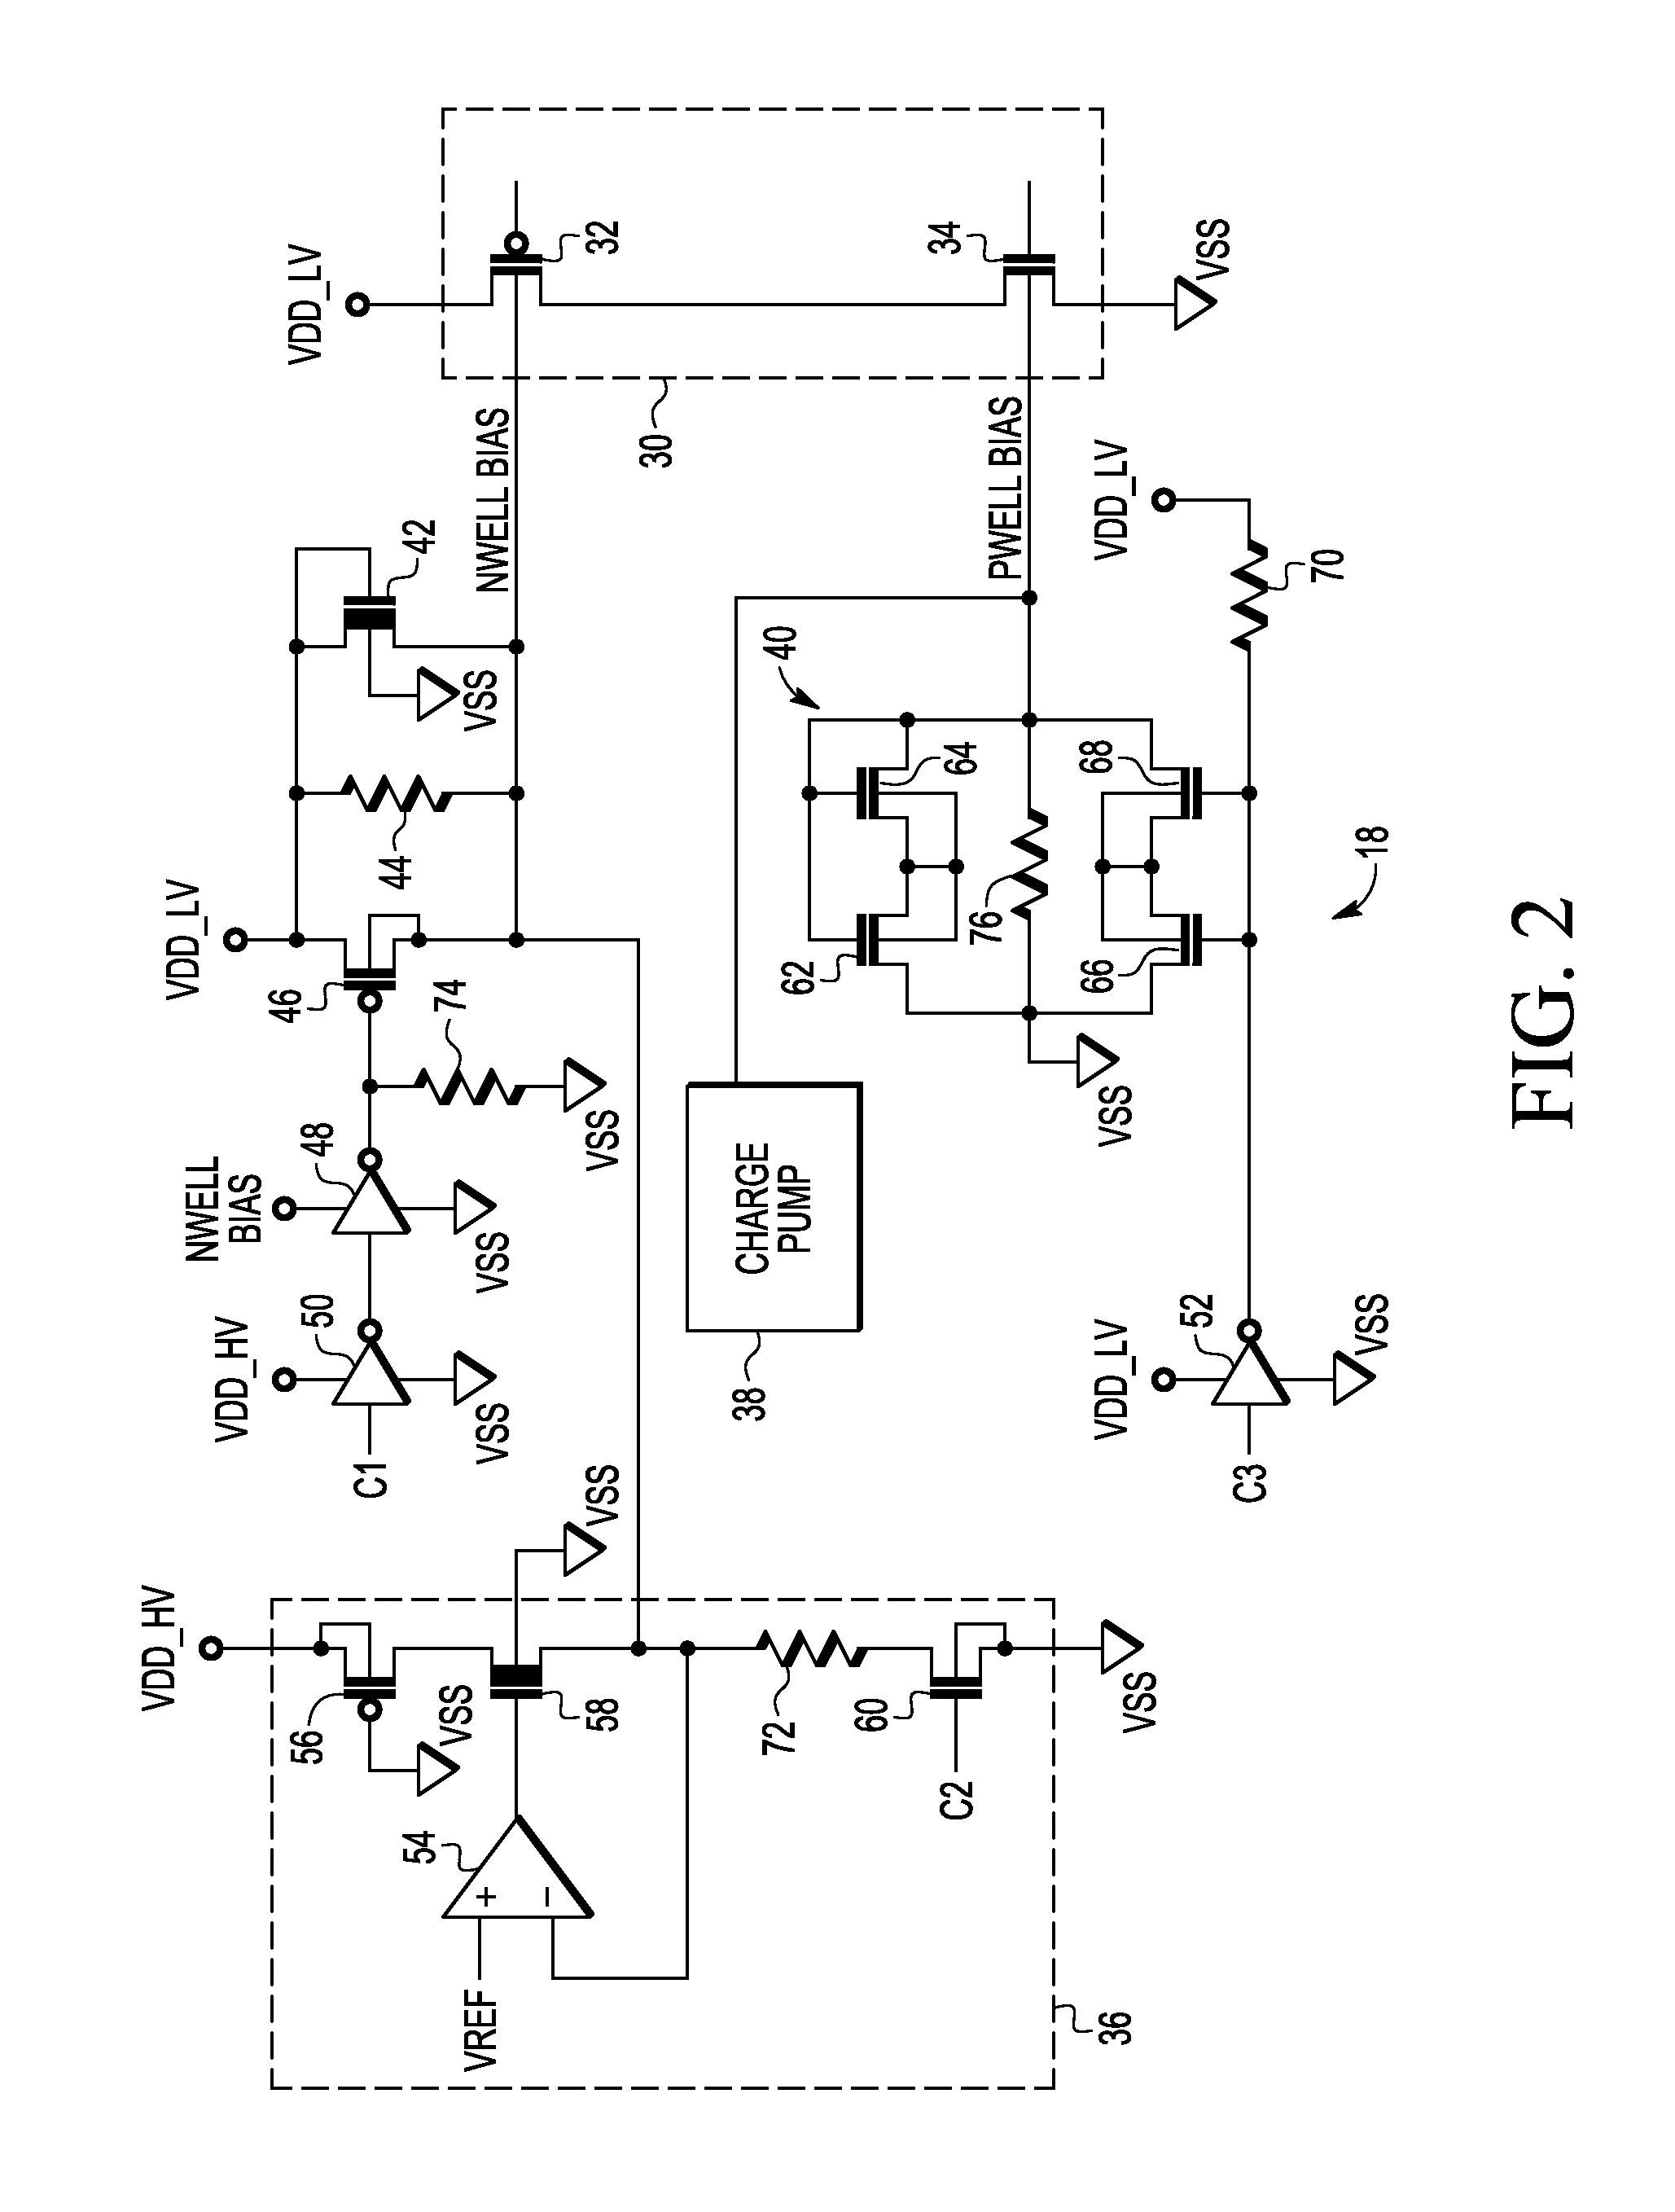 Substrate bias circuit and method for biasing a substrate